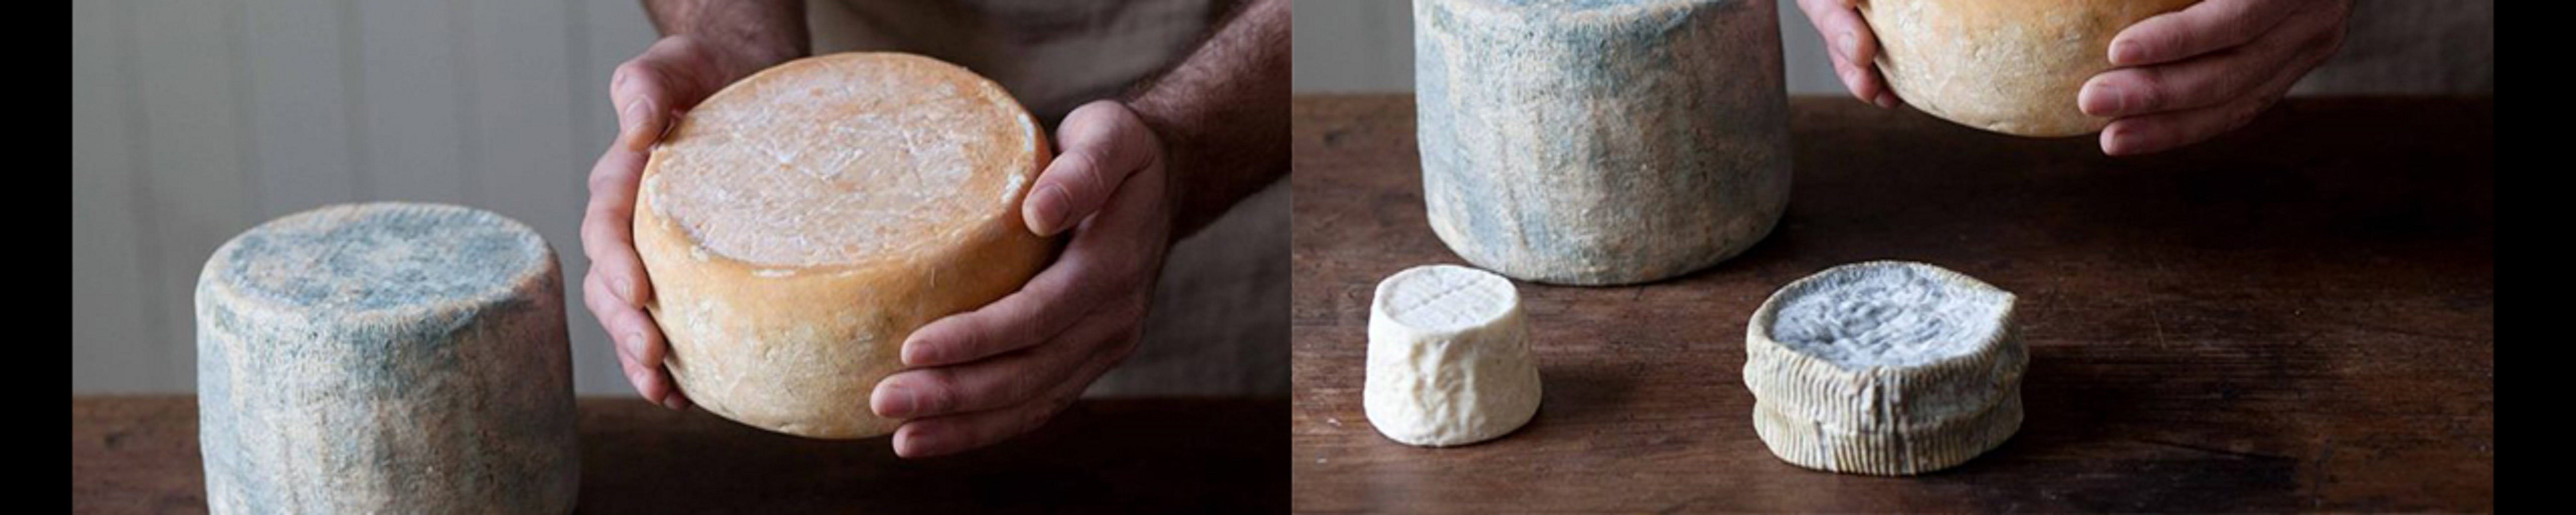 Cheese Making Basics Class - Melbourne Tourism